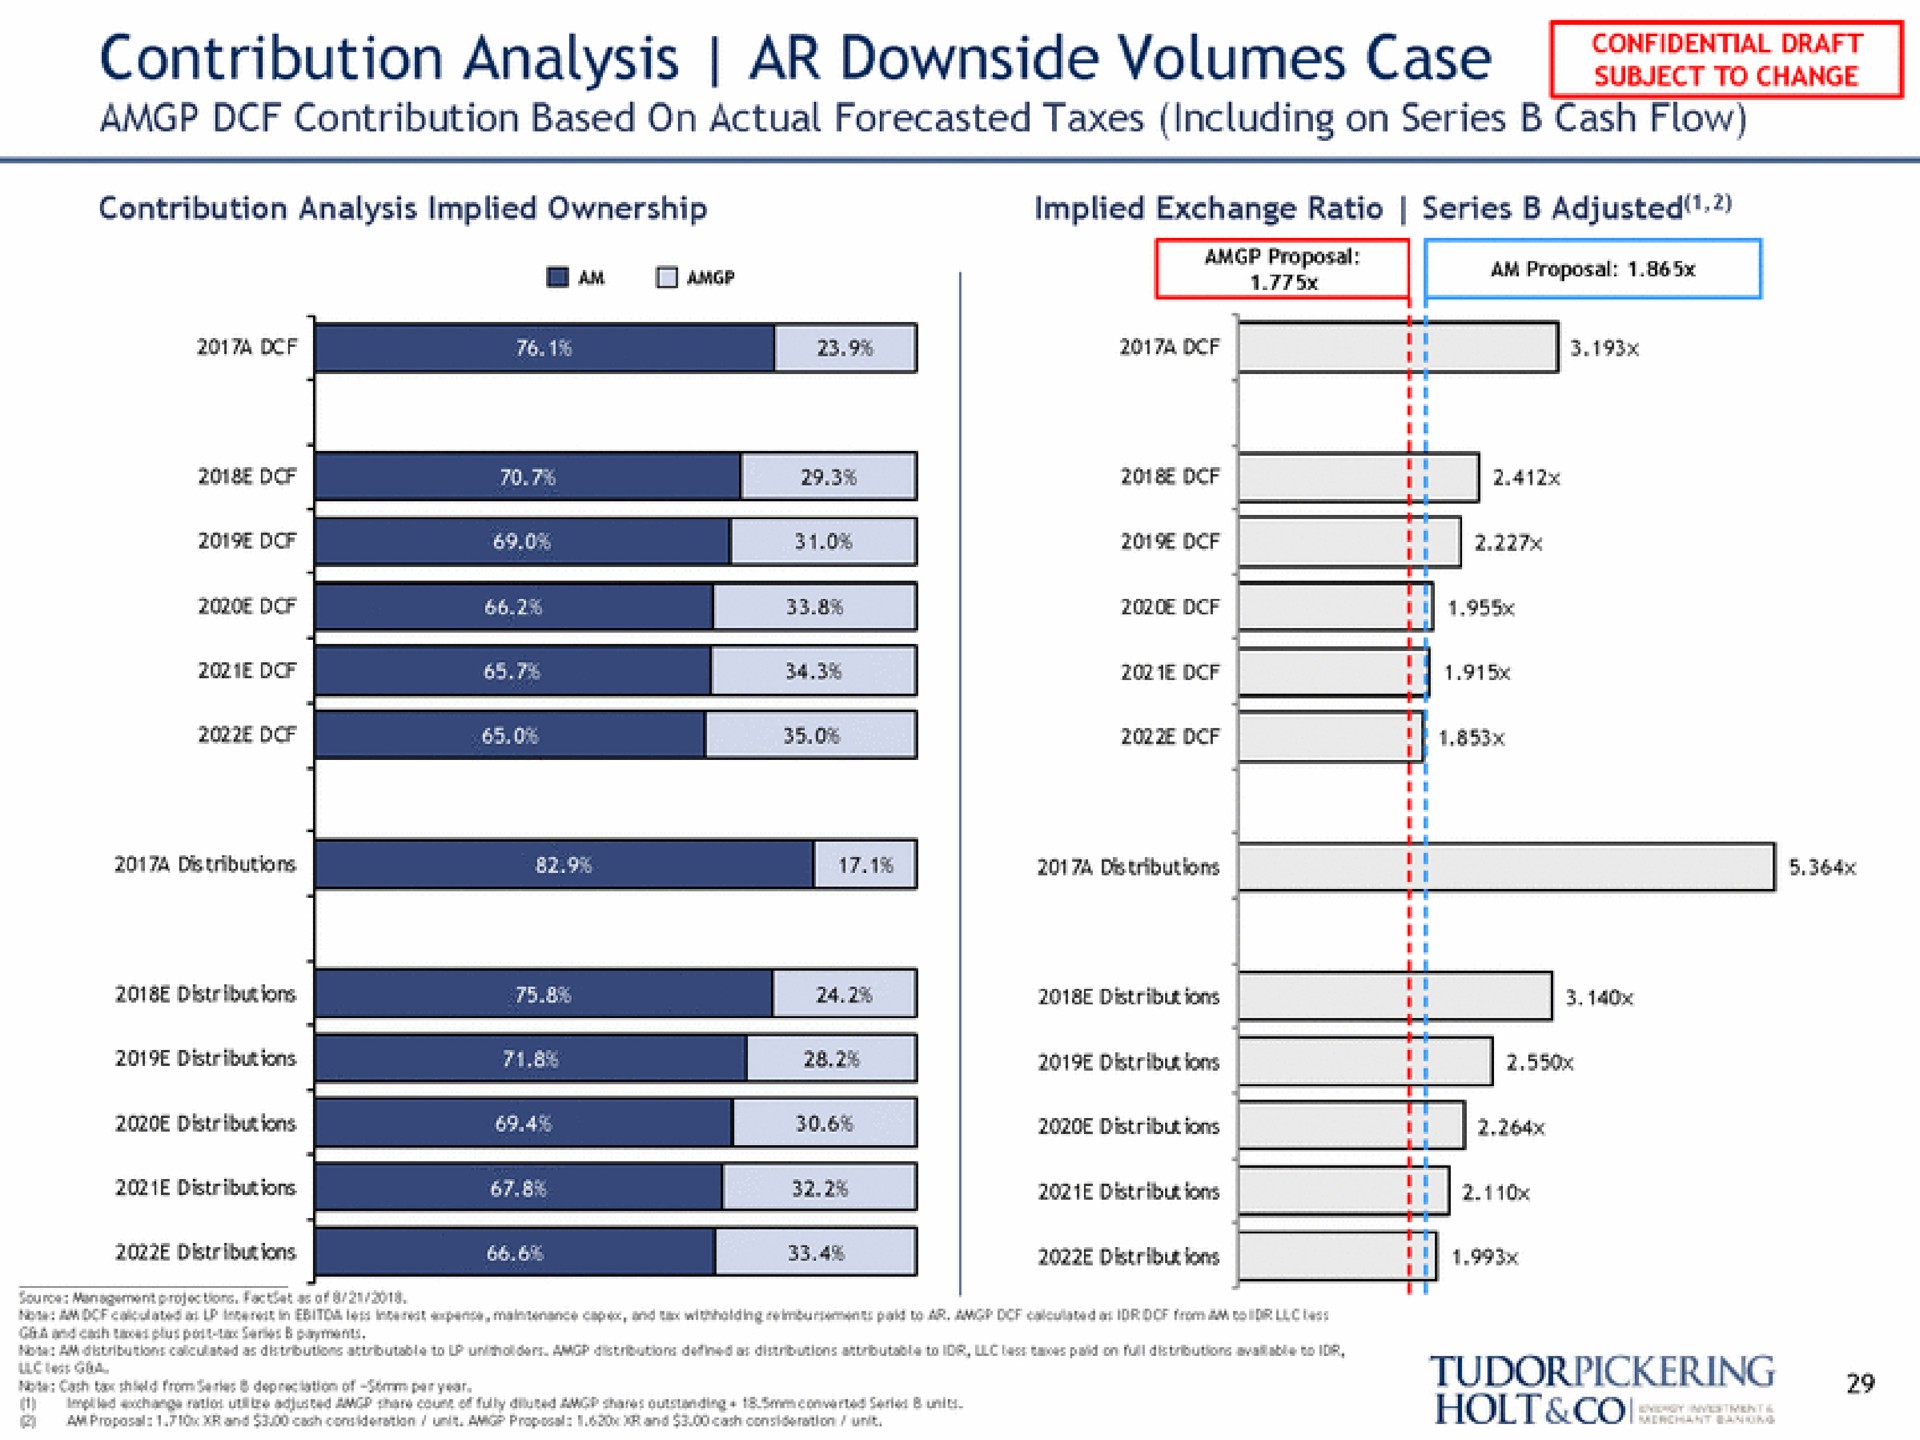 to contribution analysis downside volumes case | Tudor, Pickering, Holt & Co